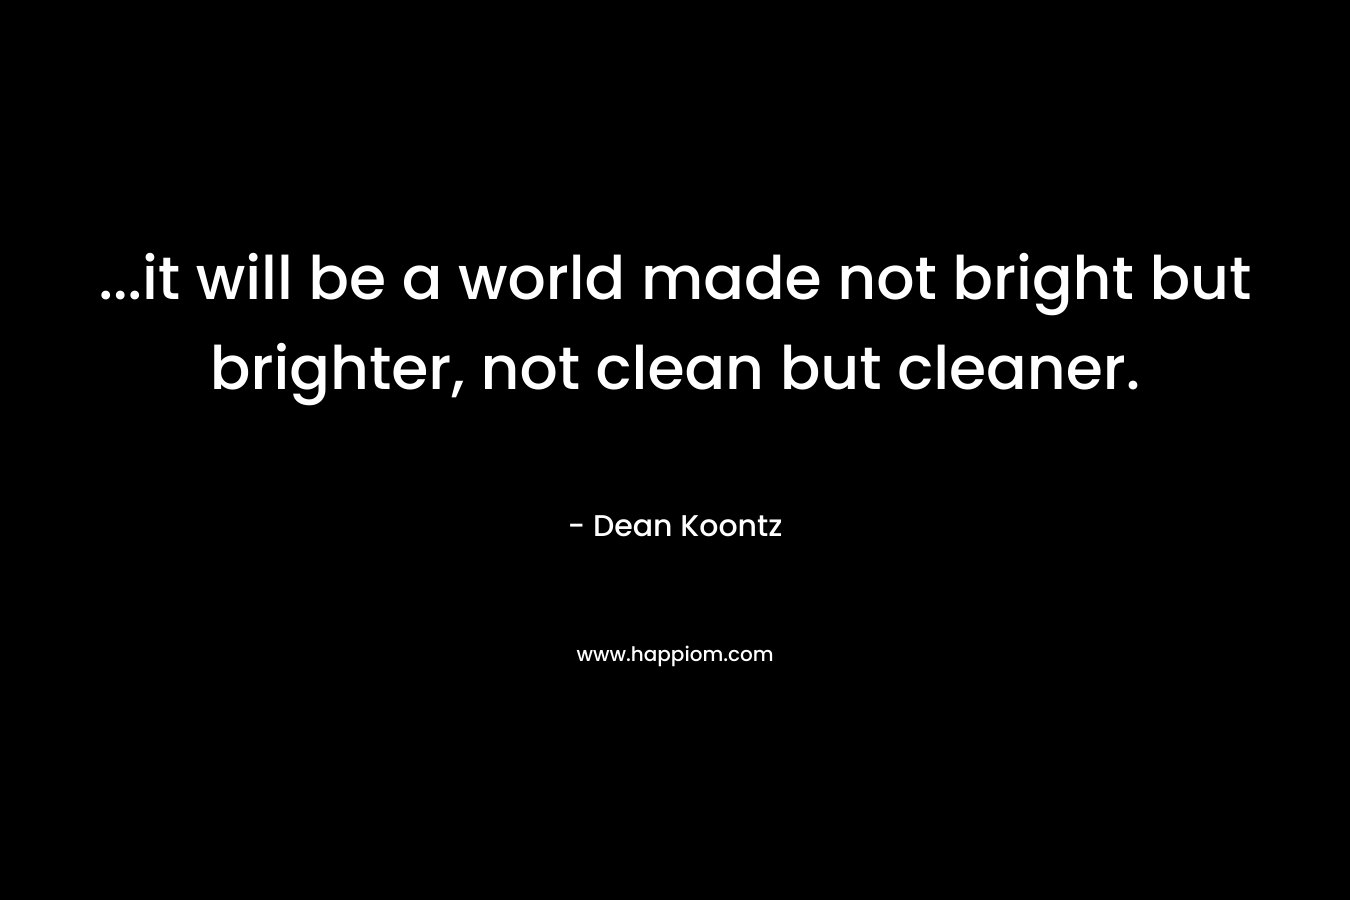 …it will be a world made not bright but brighter, not clean but cleaner. – Dean Koontz